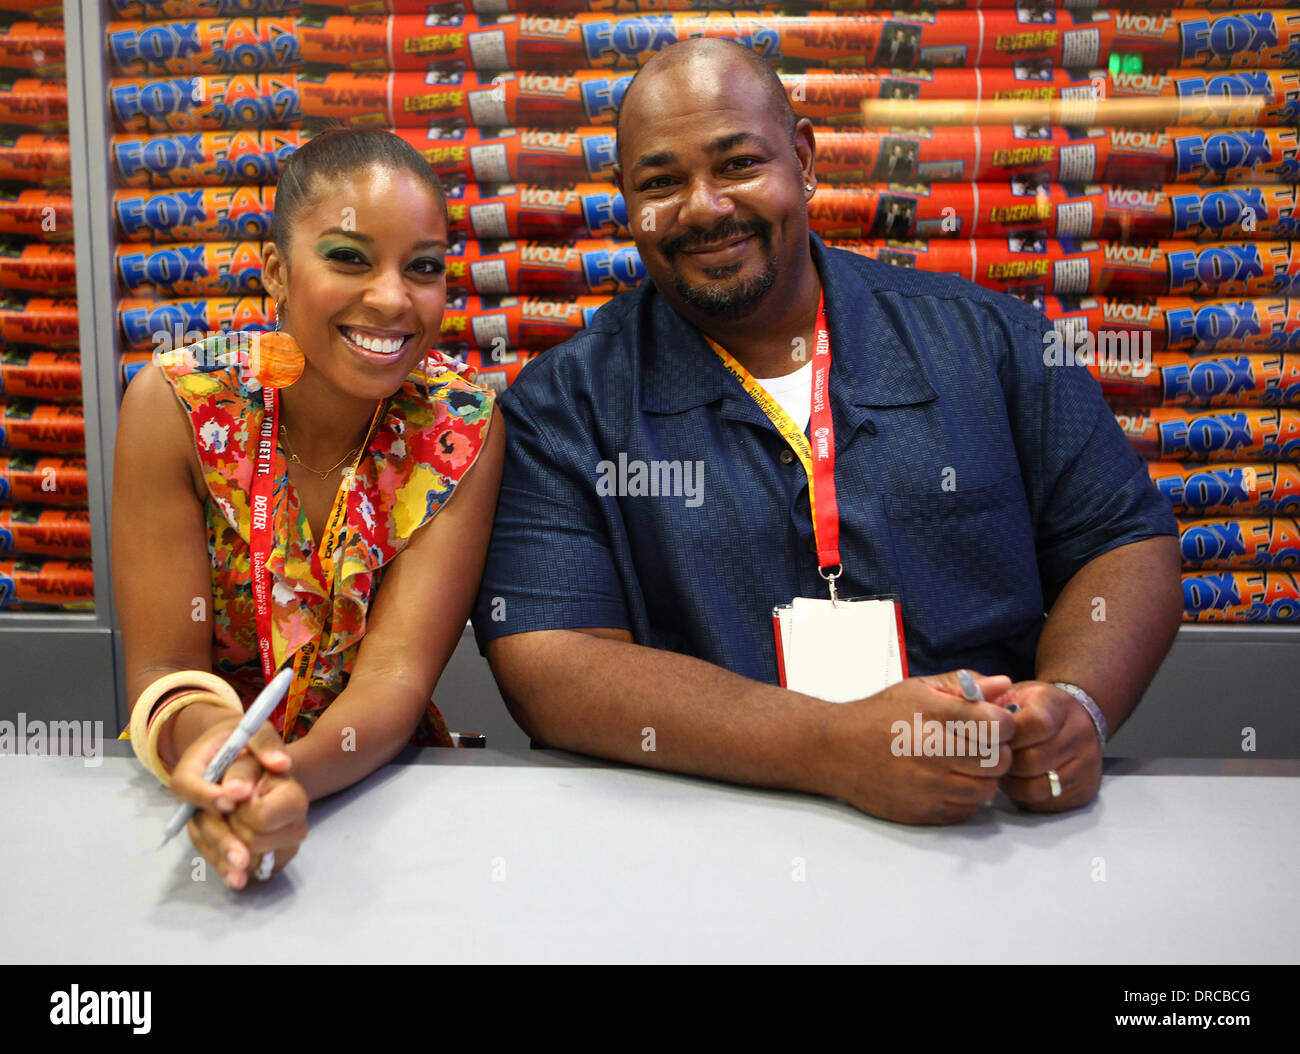 Reagan Gomez-Preston and Kevin Michael Richardson San Diego Comic-Con 2012 - 'The Cleveland Show' - Booth Signing San Diego, California - 15.07.12 Stock Photo